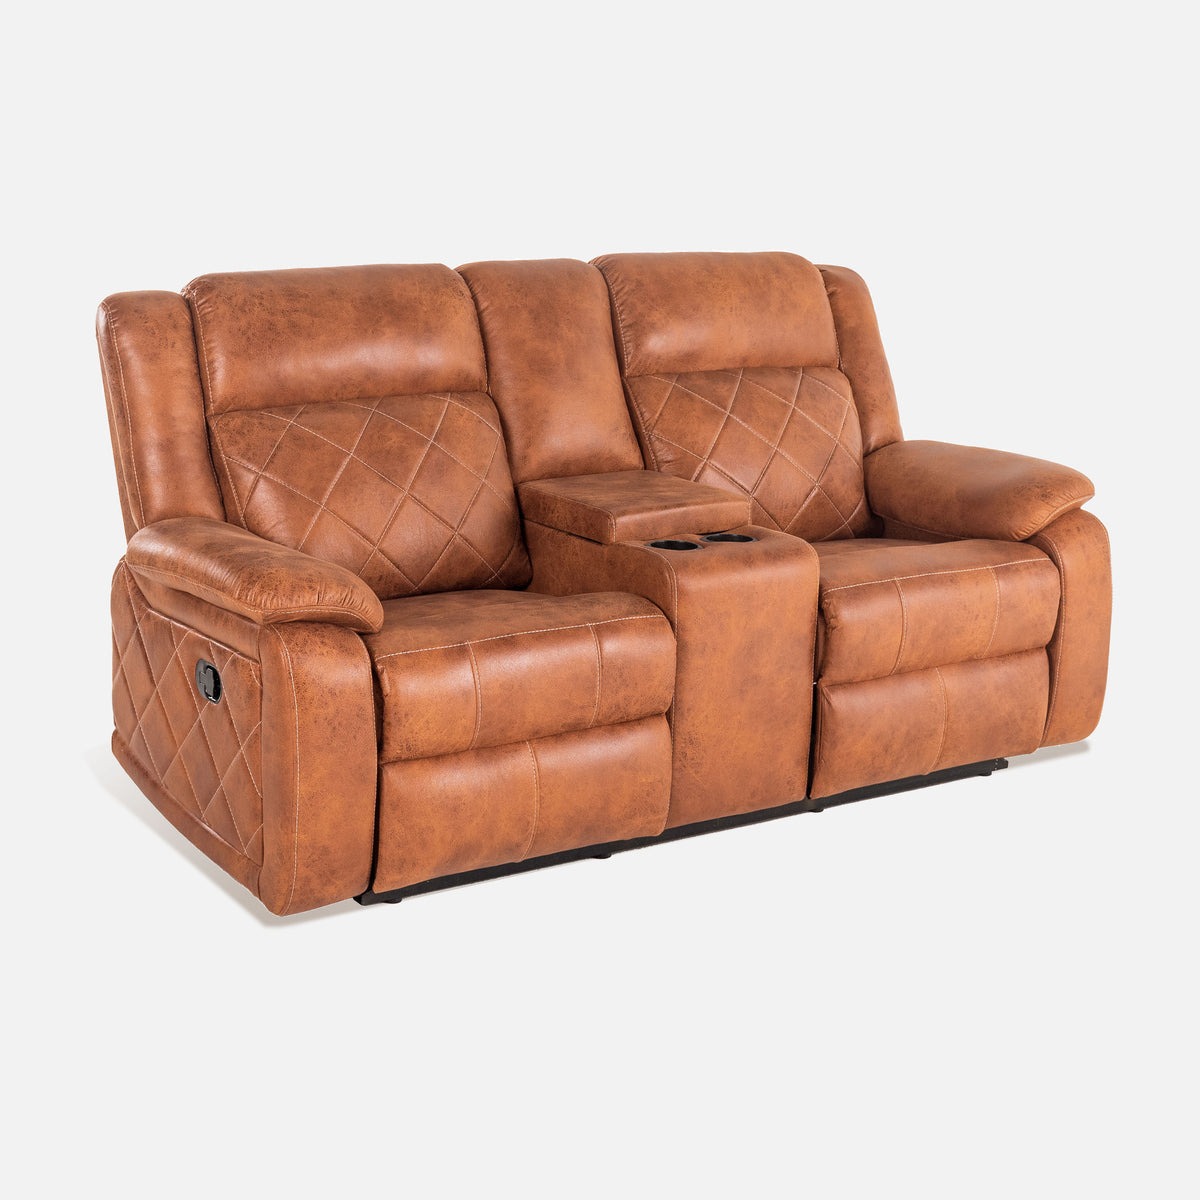 Werfo Marvel 2 Seater Recliner With Console (Tan)